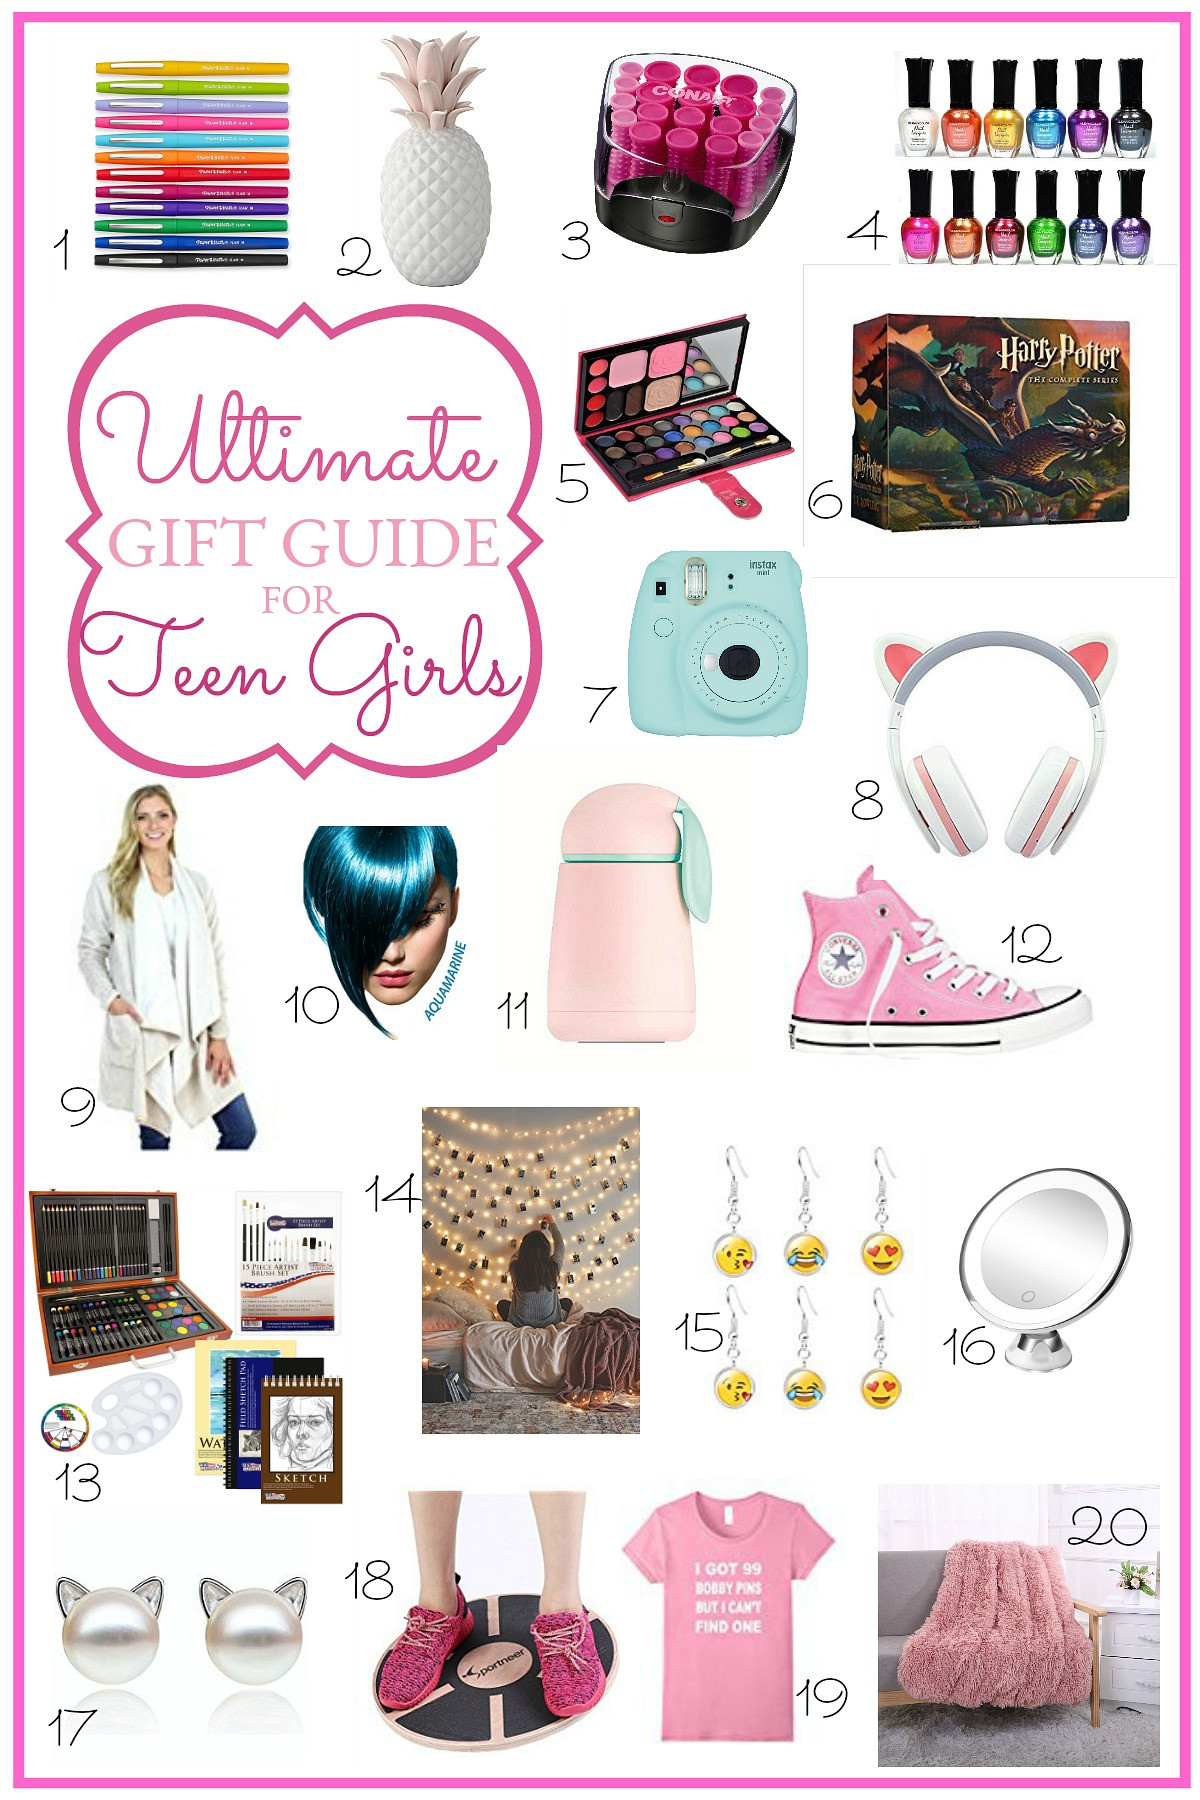 Gift Ideas For 14 Year Old Girls
 Ultimate Holiday Gift Guide for Teen Girls